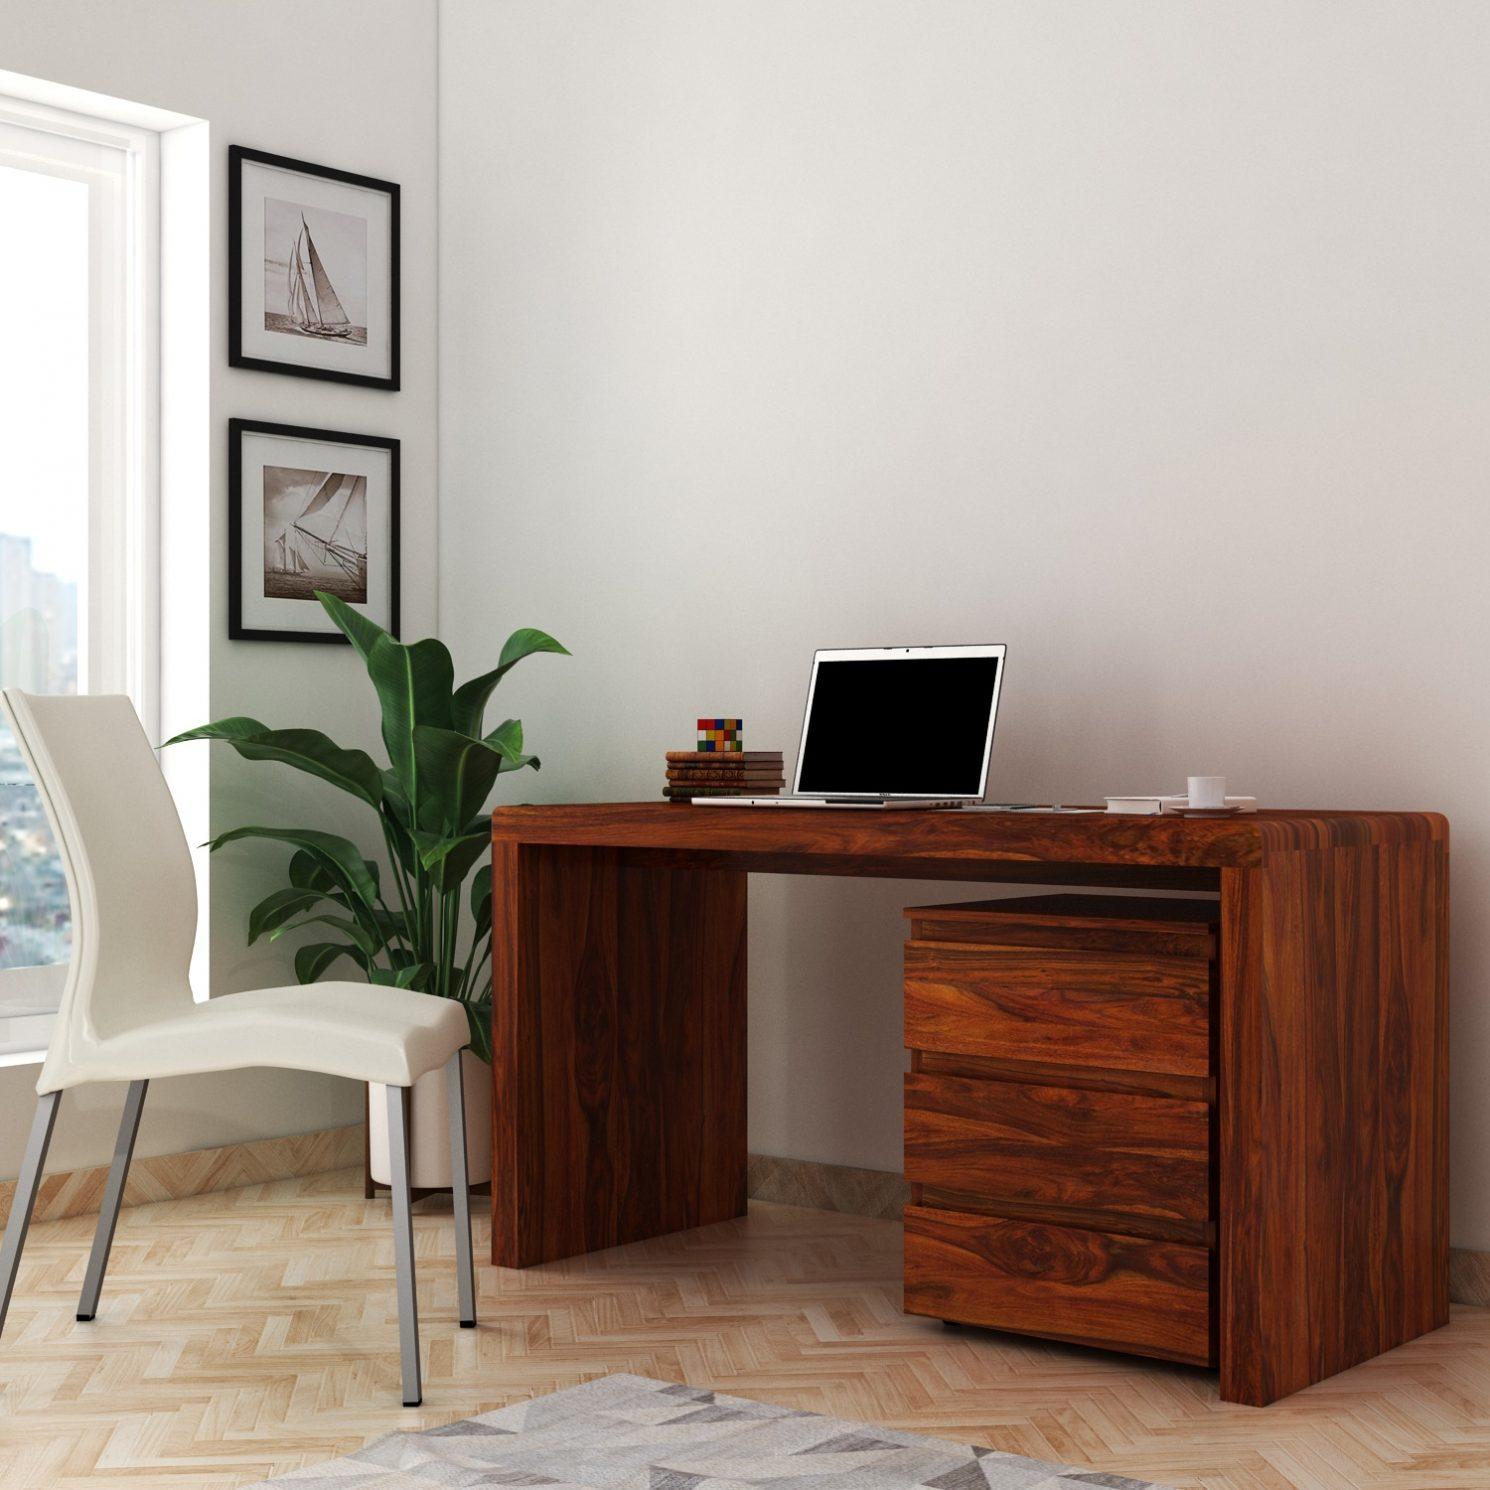 bespoke wooden study desk by fitted wardrobes and bedrooms london, uk